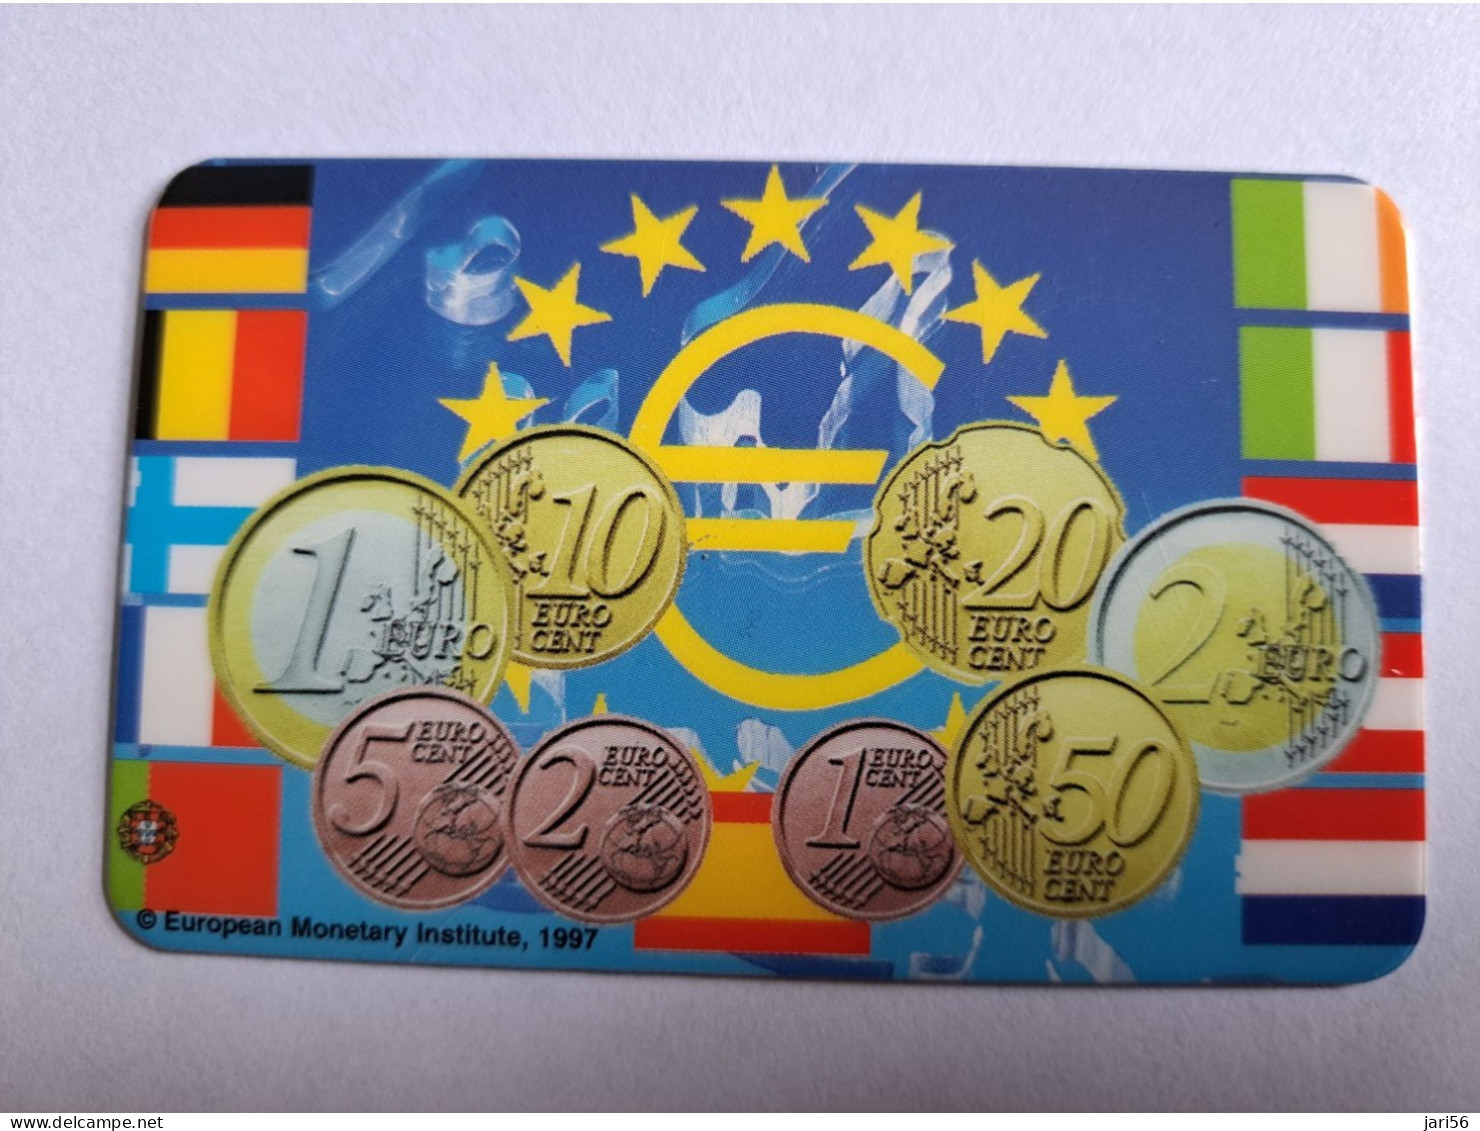 GREAT BRITAIN   20 UNITS   / EURO COINS/ EUROPE /FRONT / PHONECARD   (date 01/  00 )  PREPAID CARD / MINT      **12915** - Collezioni